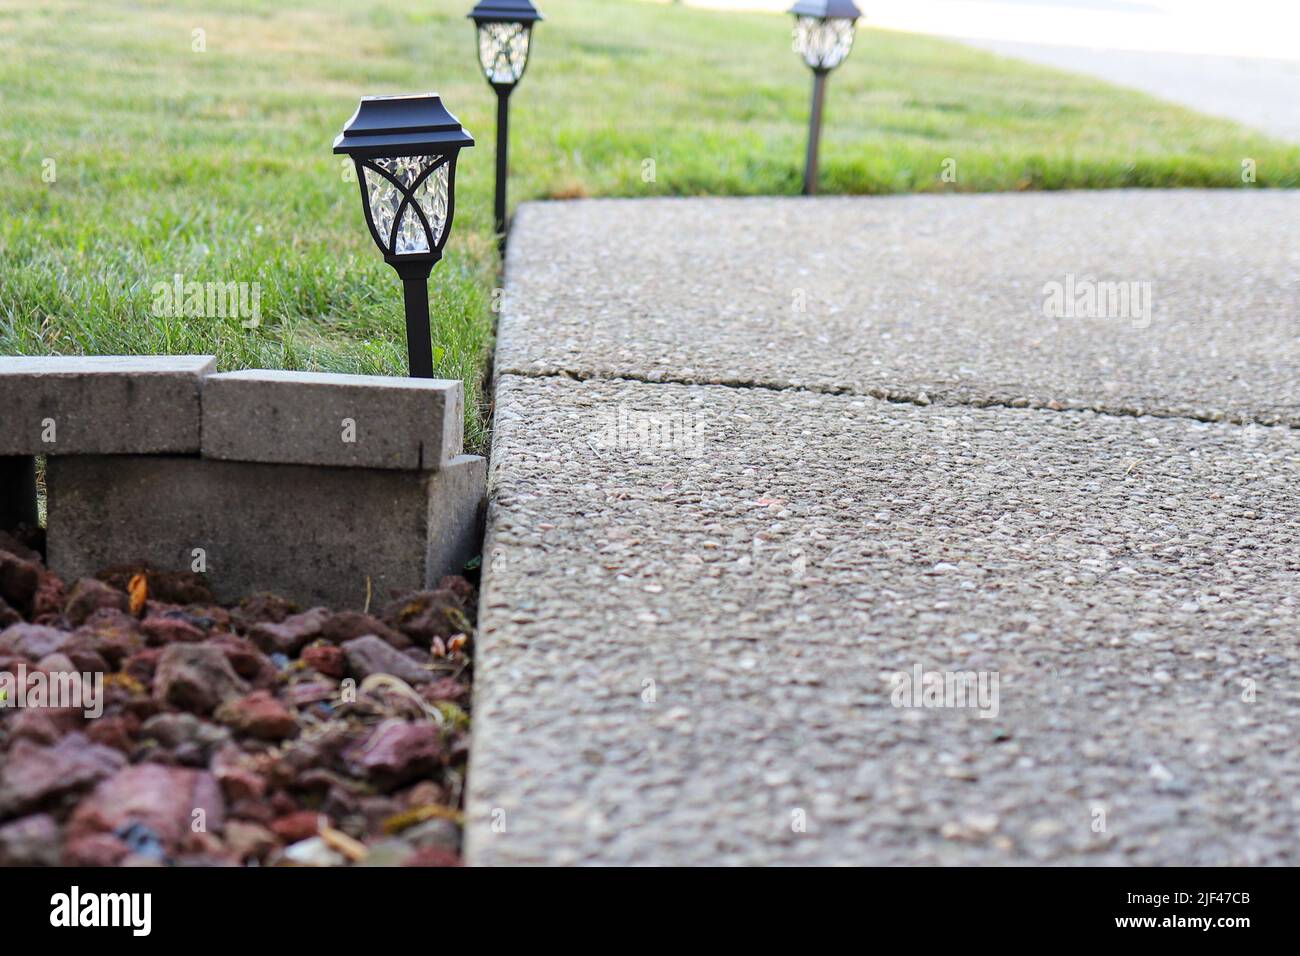 Close up of solar landscaping lights in a lawn Stock Photo